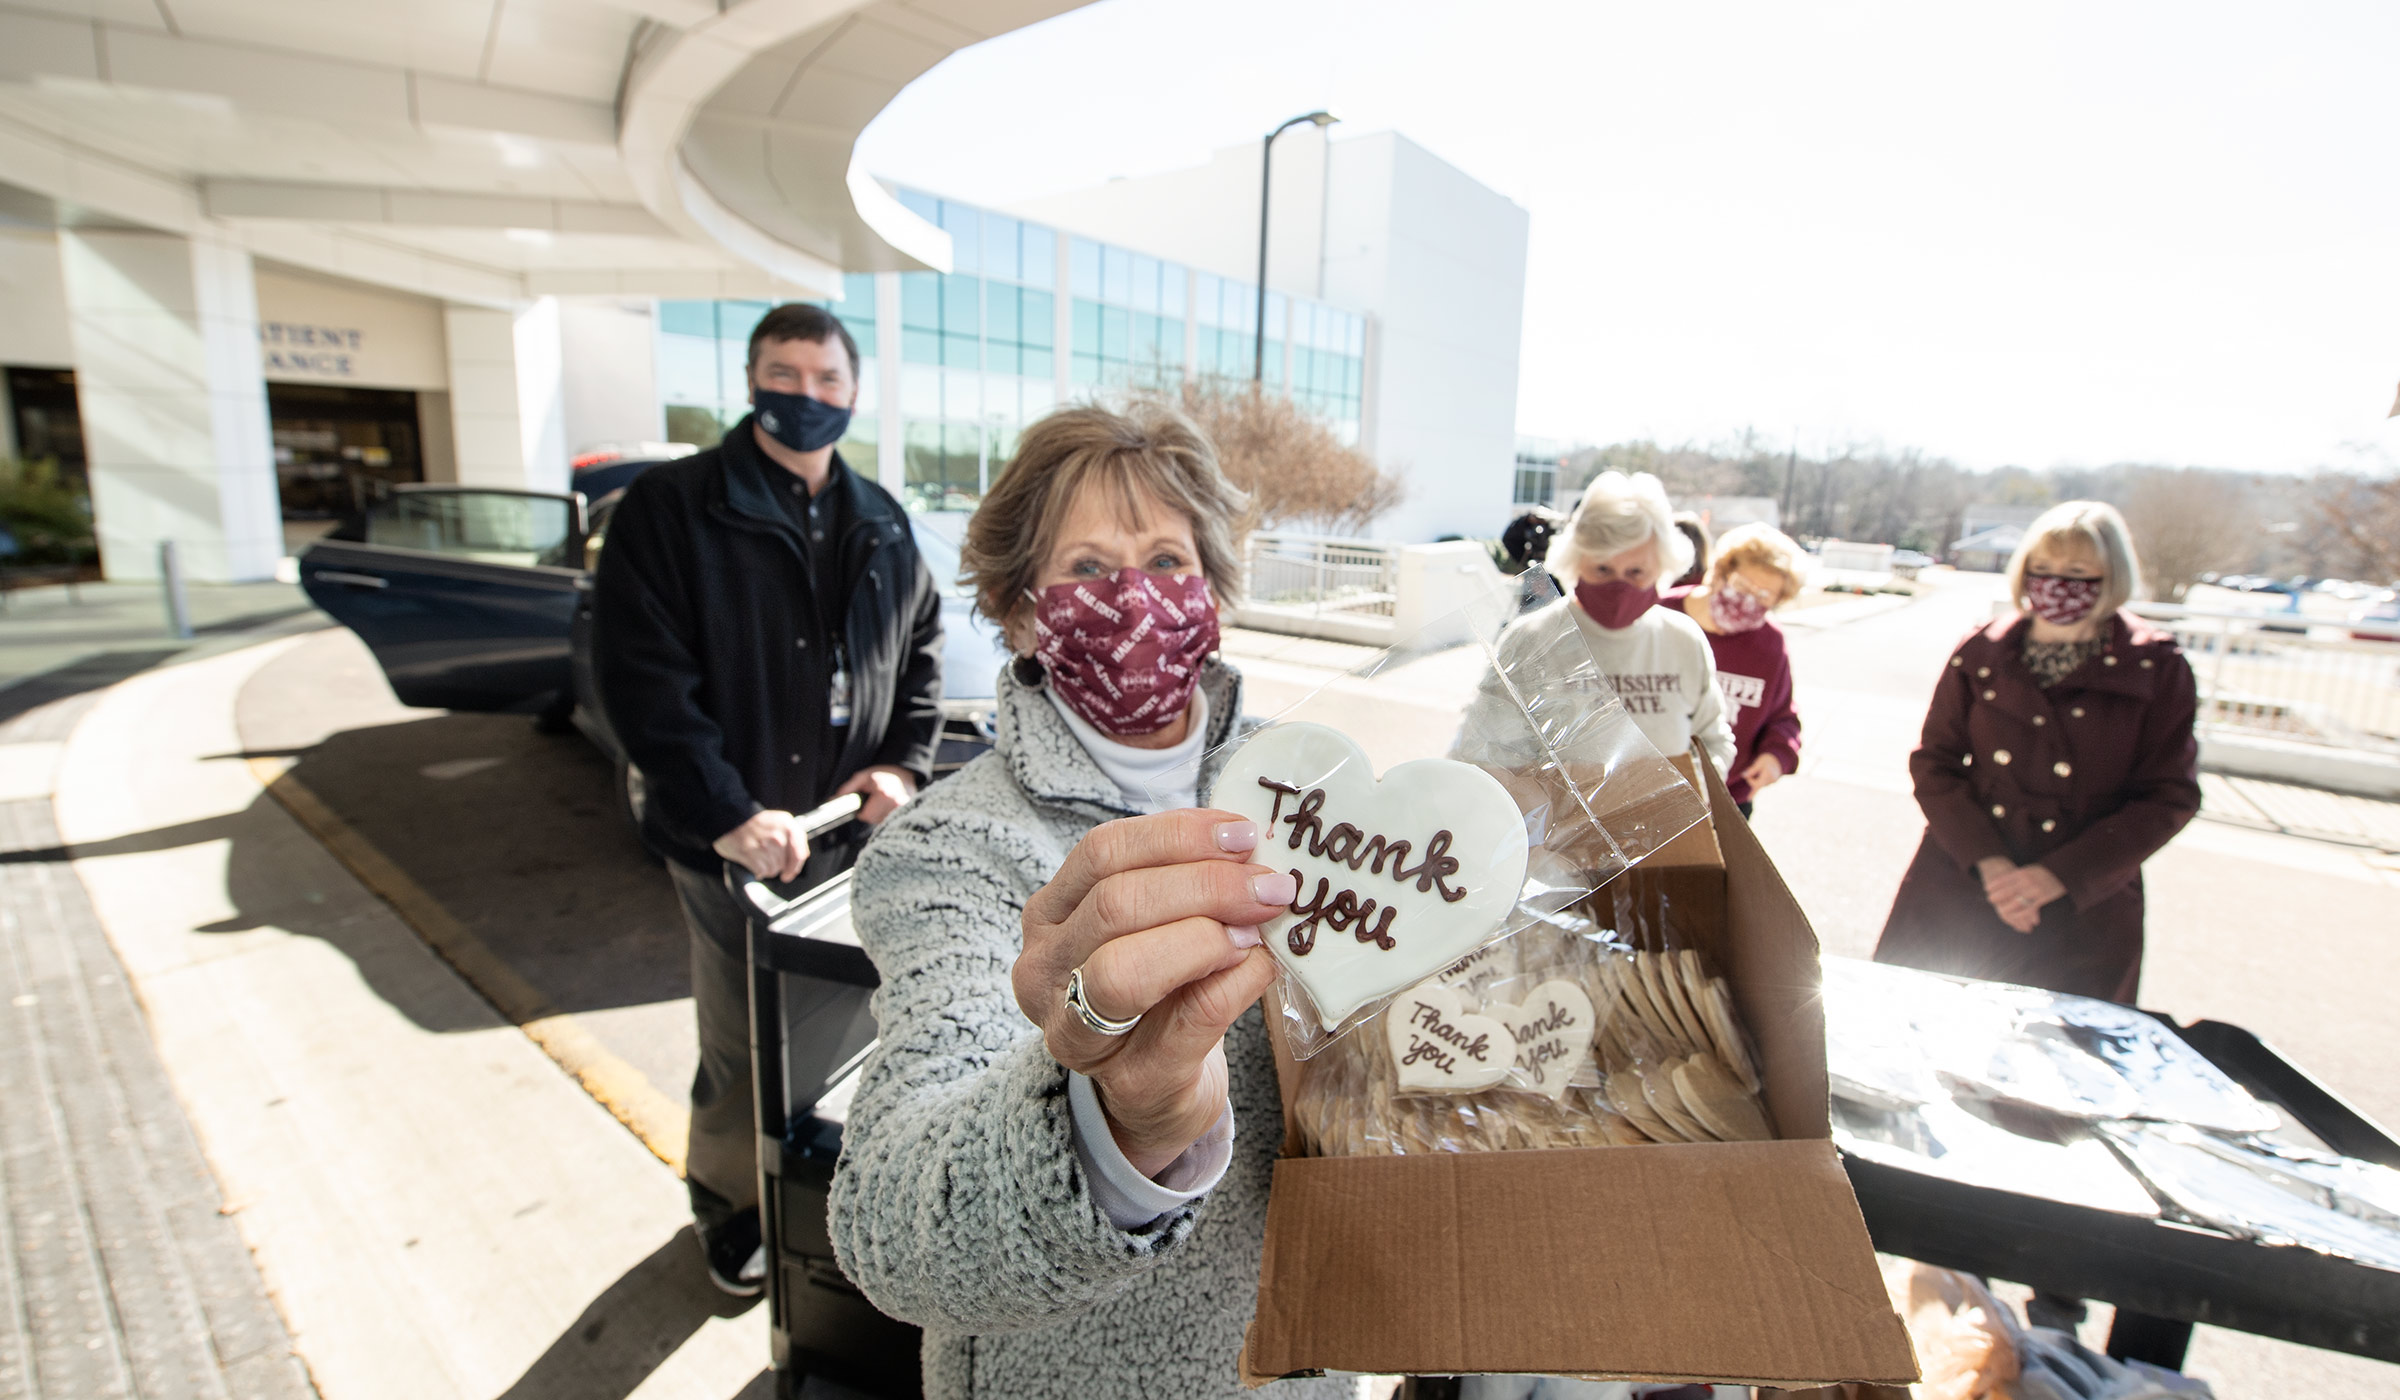 MSU Alumni Carol Reed holds a &quot;Thank You&quot; cookie up at Oktibbeha County Hospital, as fellow Okitbbeha County Alumni ready food to go in to hospital staff treating Covid patients.